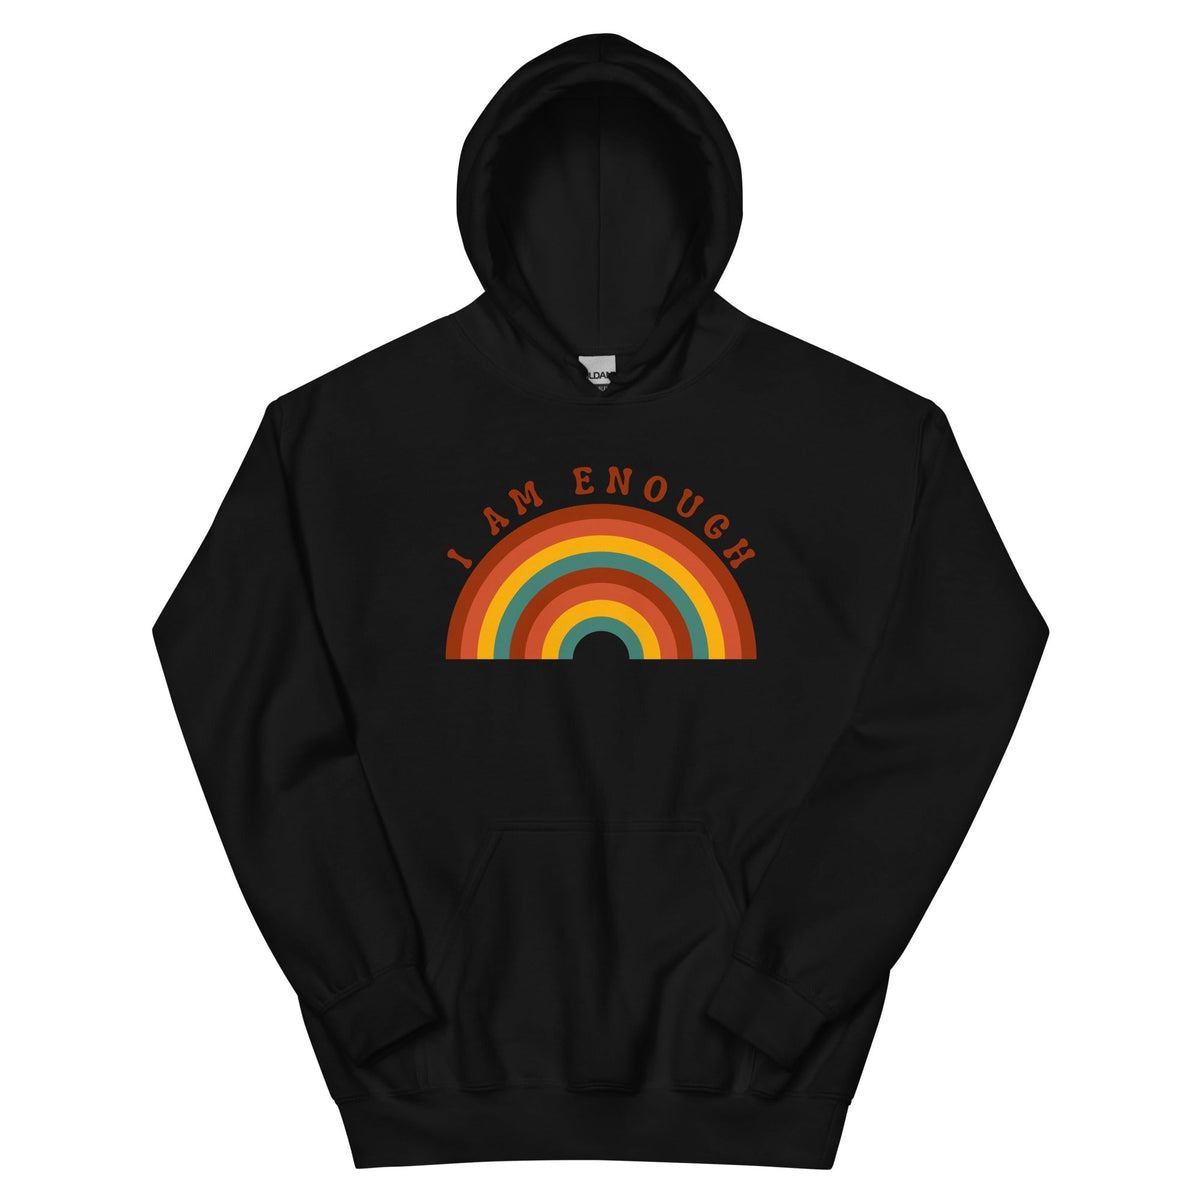 I AM ENOUGH RAINBOW - Motivational Hoodie for Women - 3